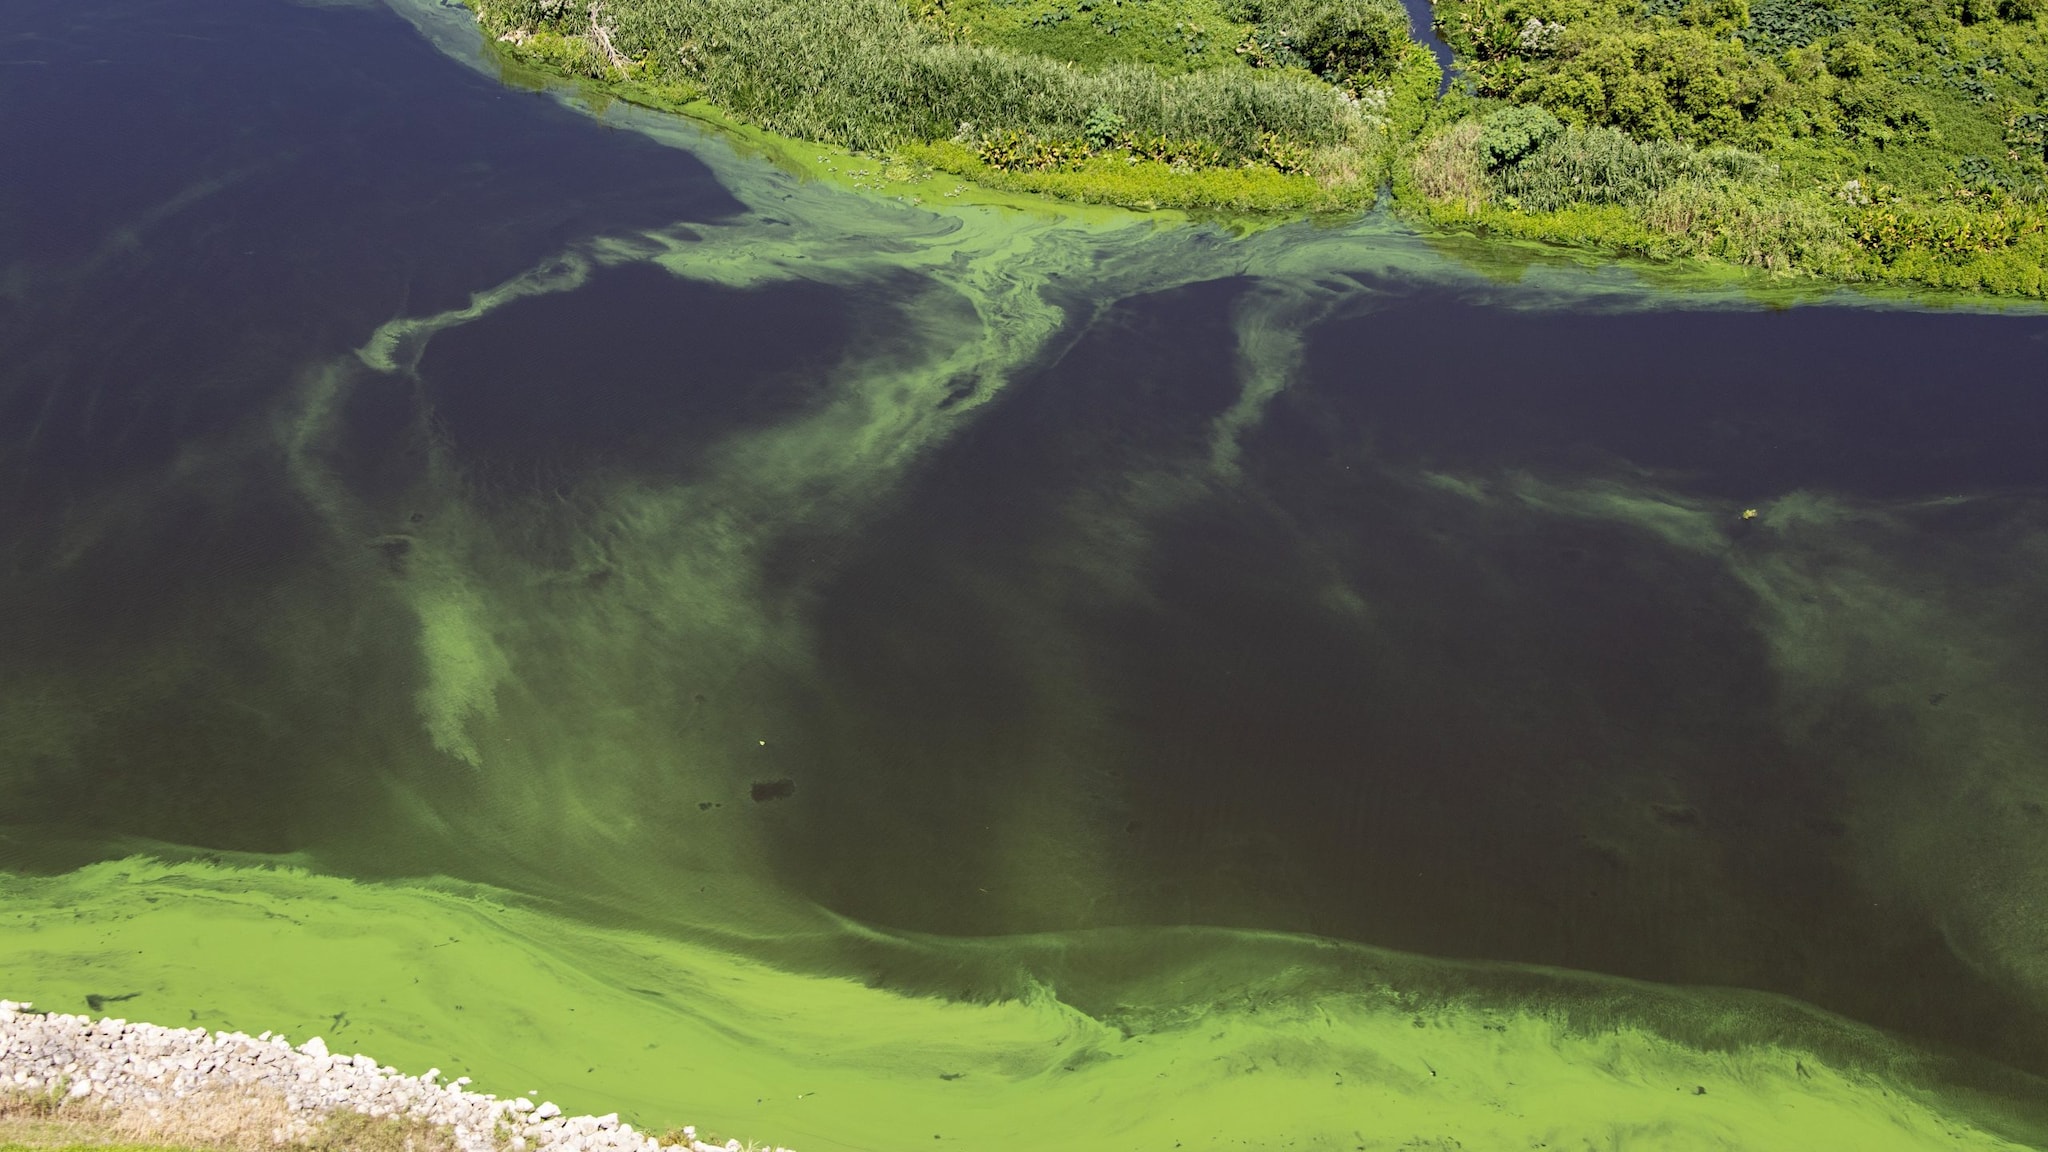 Aerial view of a harmful algal bloom (HAB) that has turned the water green.